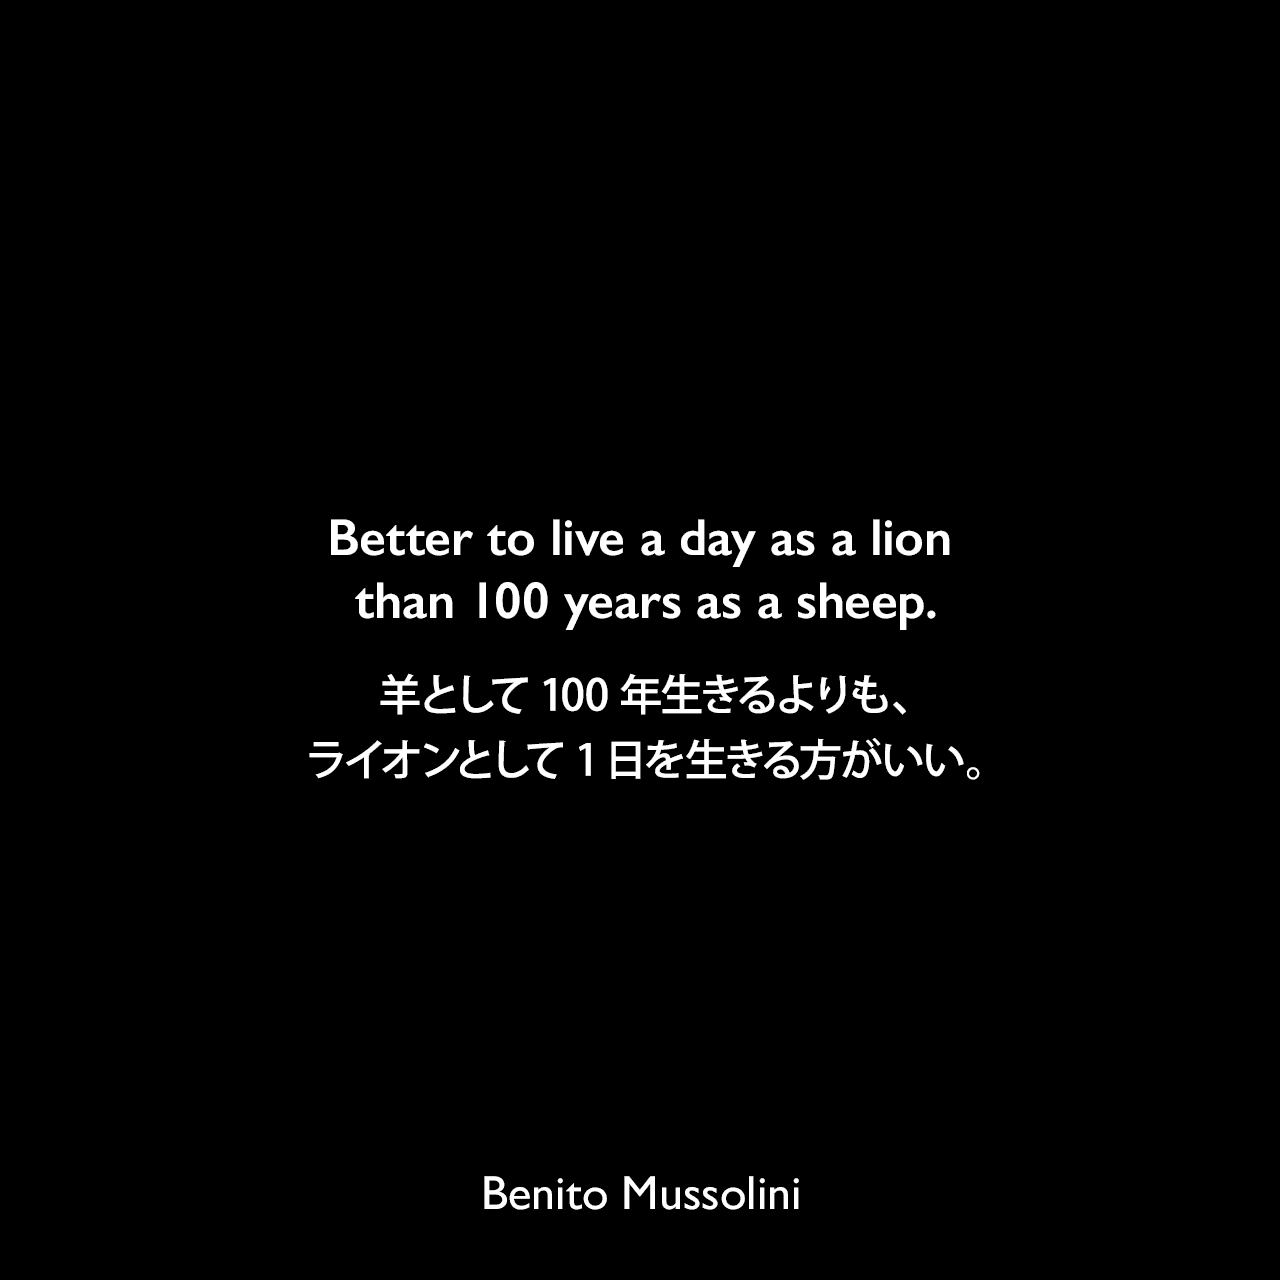 Better to live a day as a lion than 100 years as a sheep.羊として100年生きるよりも、ライオンとして1日を生きる方がいい。- 1943年8月2日タイム誌よりBenito Mussolini